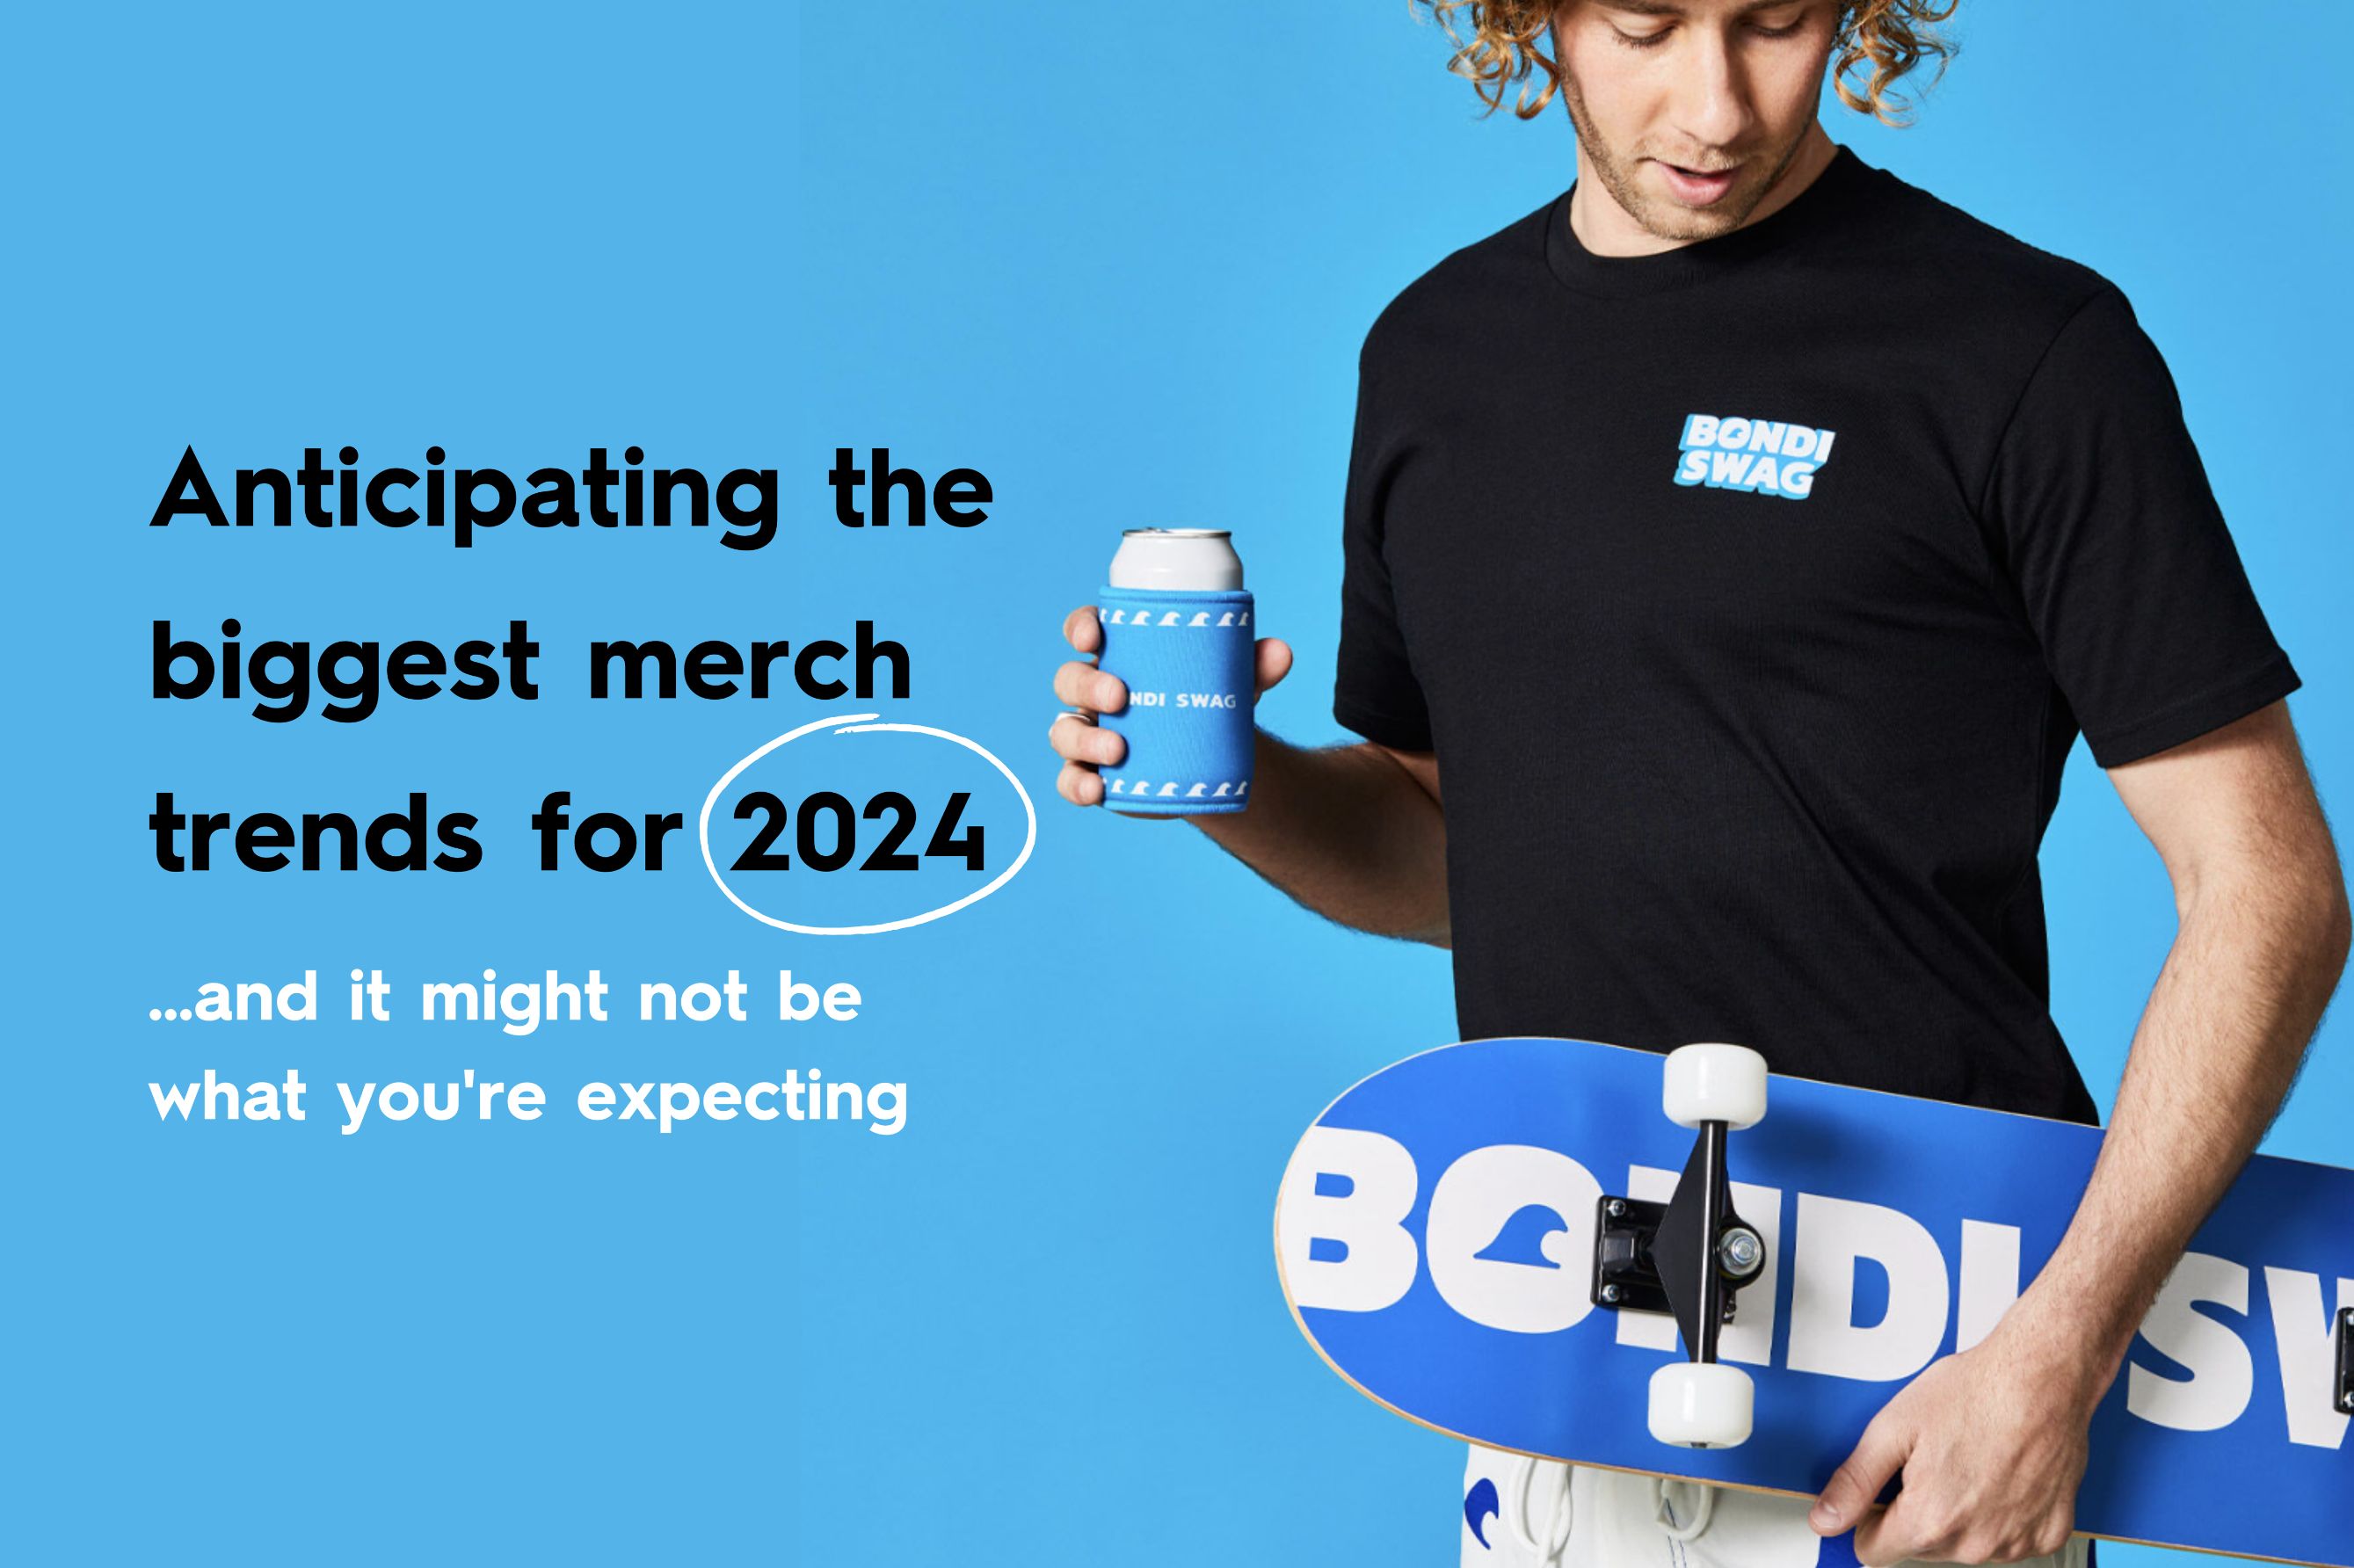 Anticipating the biggest merch trends for 2024 (and it might not be what you’re expecting)